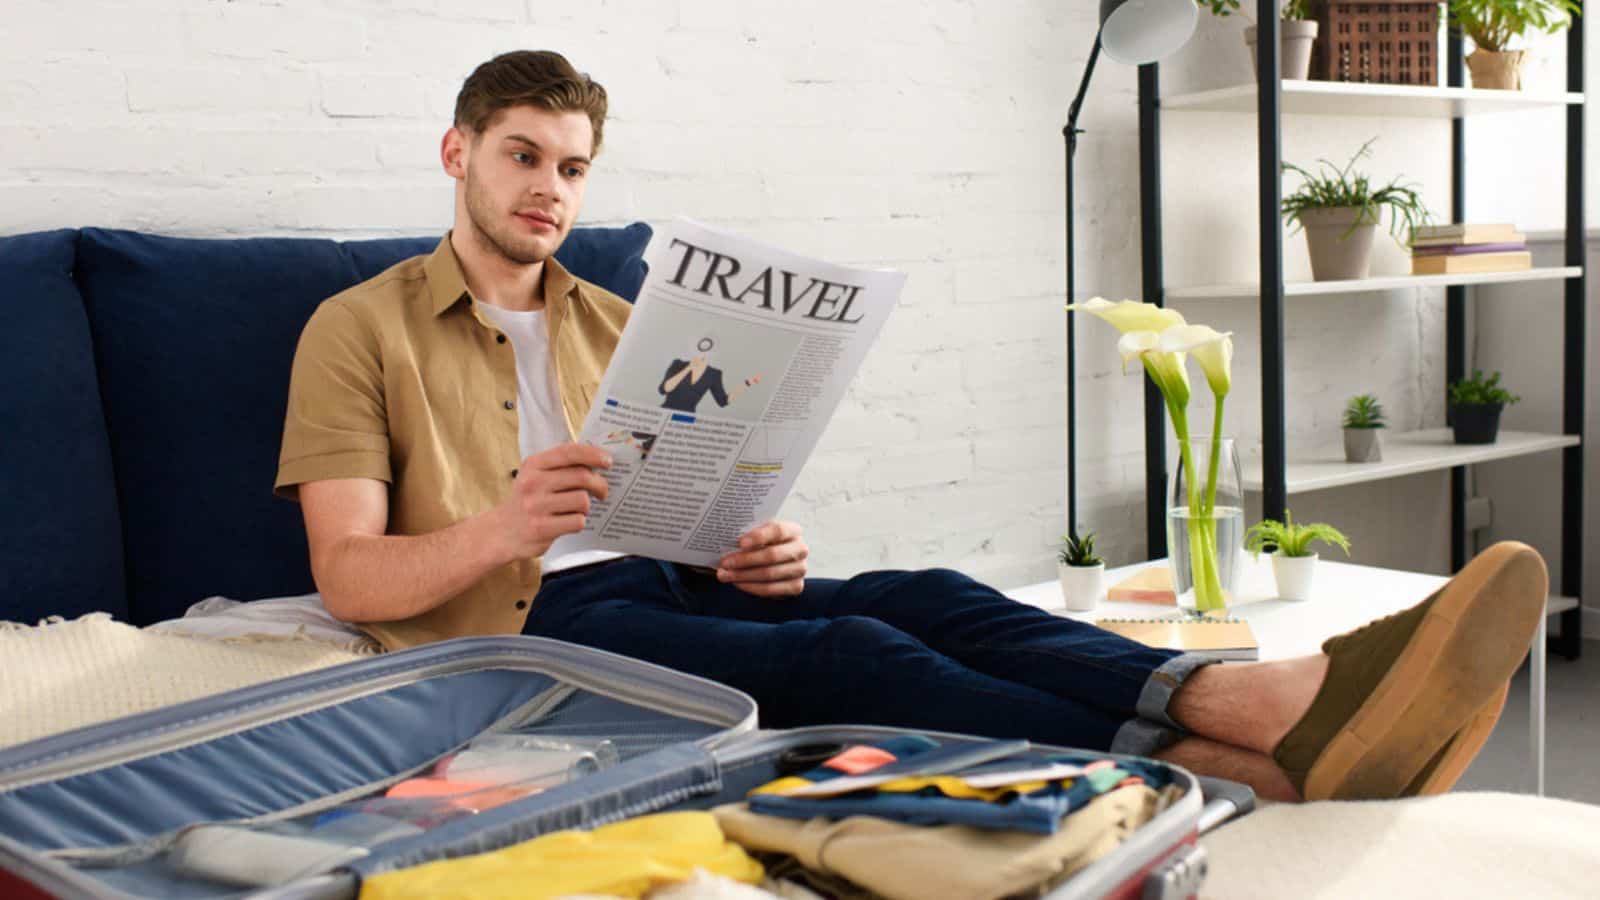 Young man reading travel newspaper while packing suitcase on bed